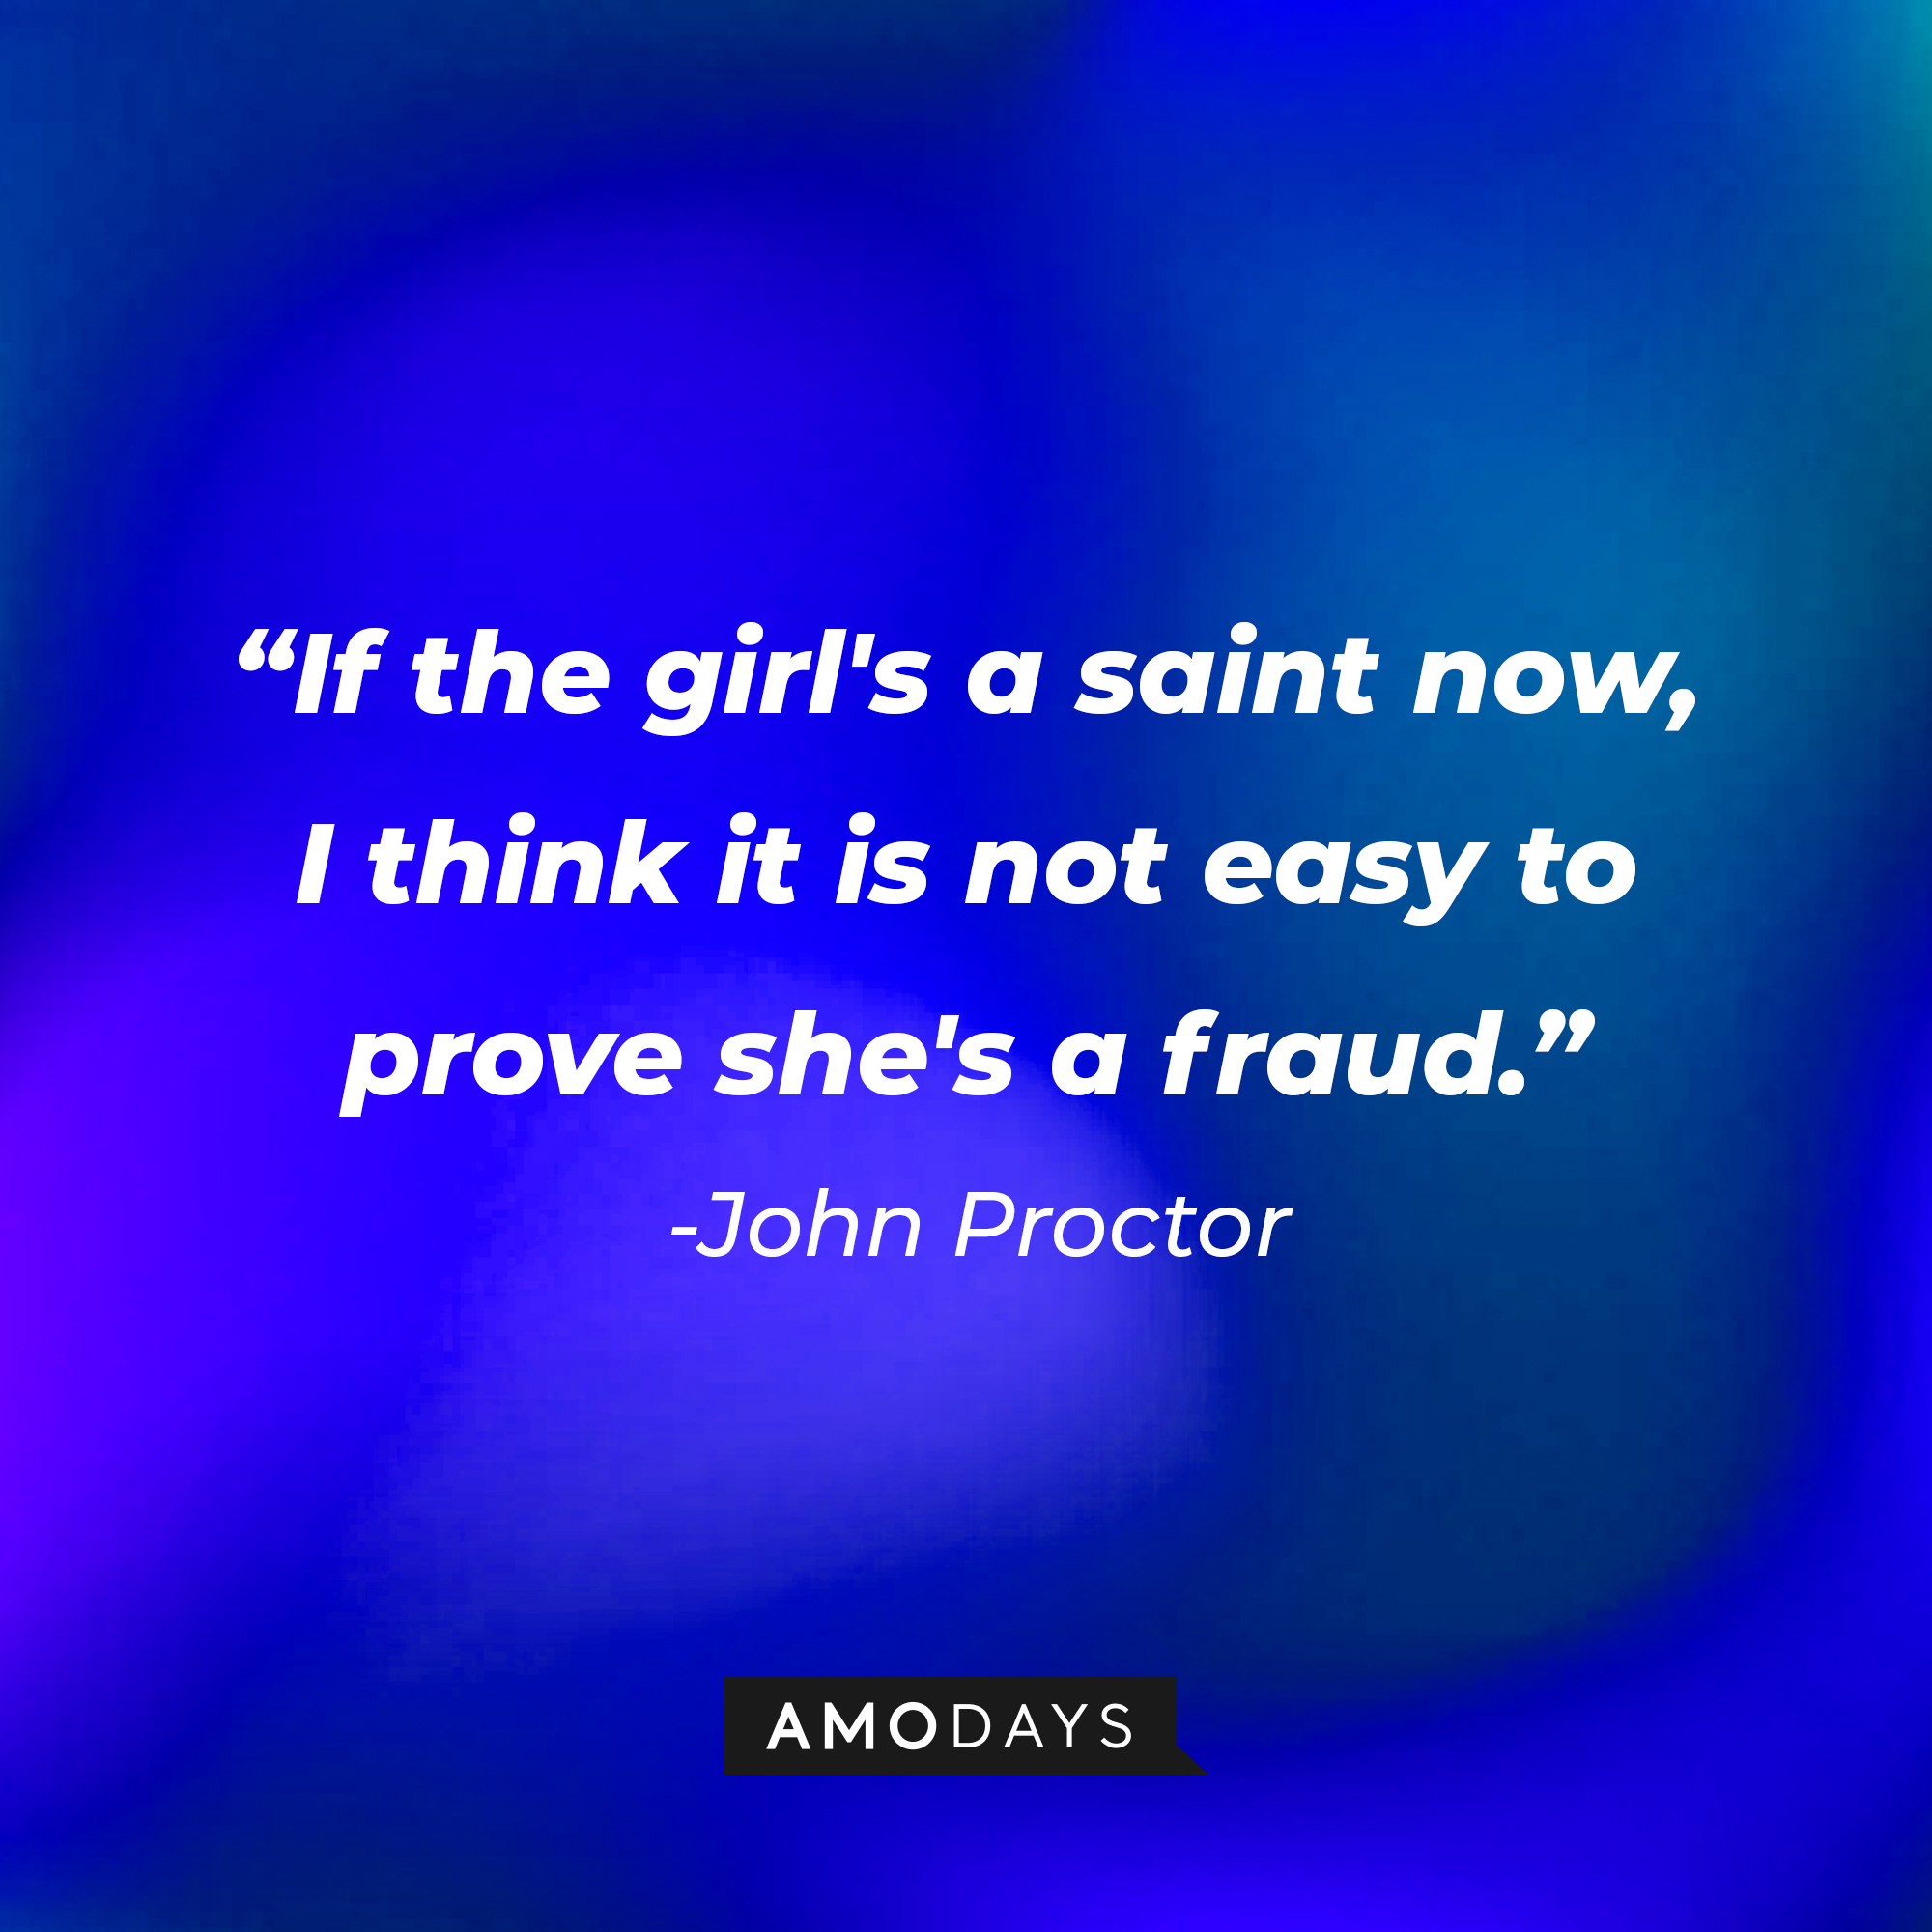 John Proctor's quote: "If the girl's a saint now, I think it is not easy to prove she's a fraud." | Image: AmoDays